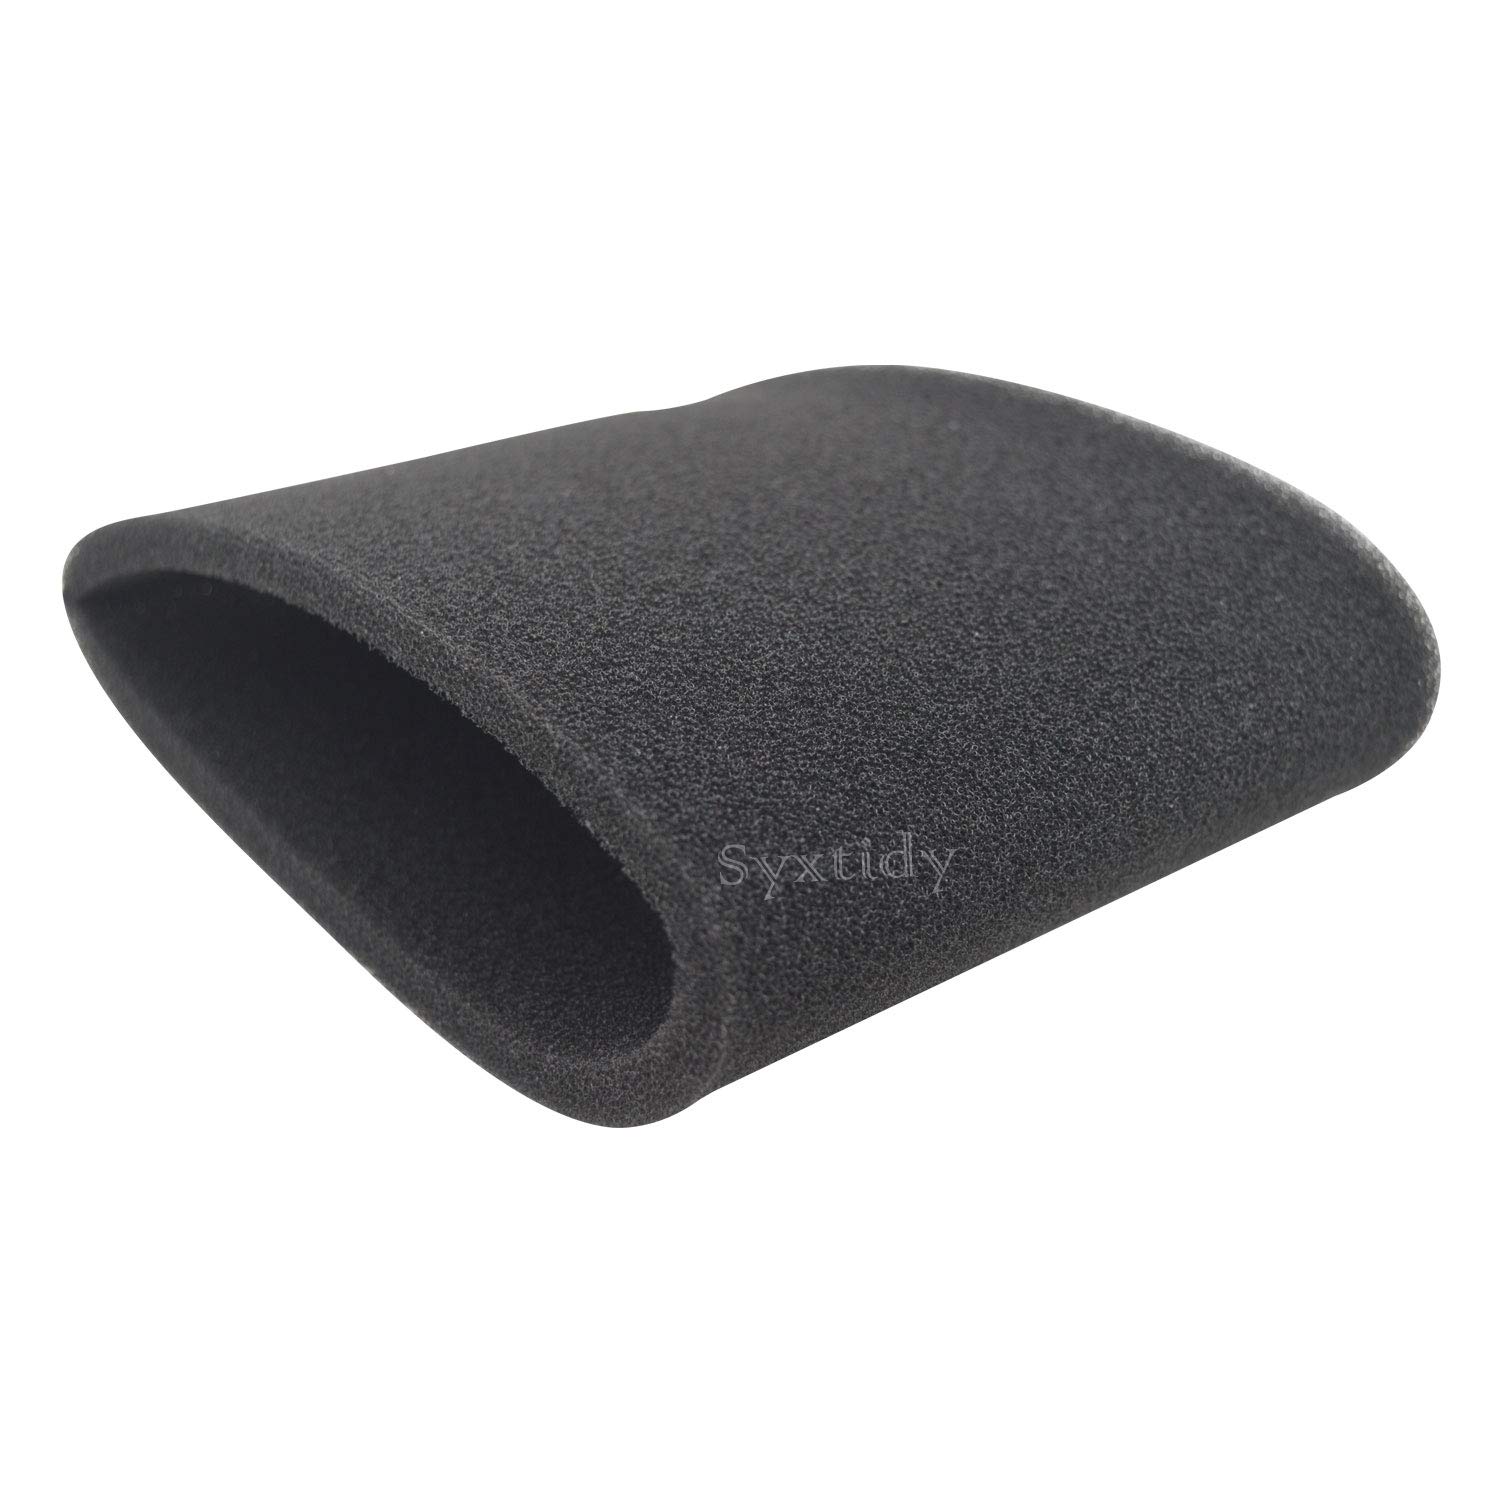 Black 90585 Foam Sleeve VF2001 Foam Replacements Filters For Wet Dry Vacuum Cleaner, Fits Most Shop-Vac, Vacmaster & Genie Shop Vacuum Cleaner, Replace Parts # 9058500